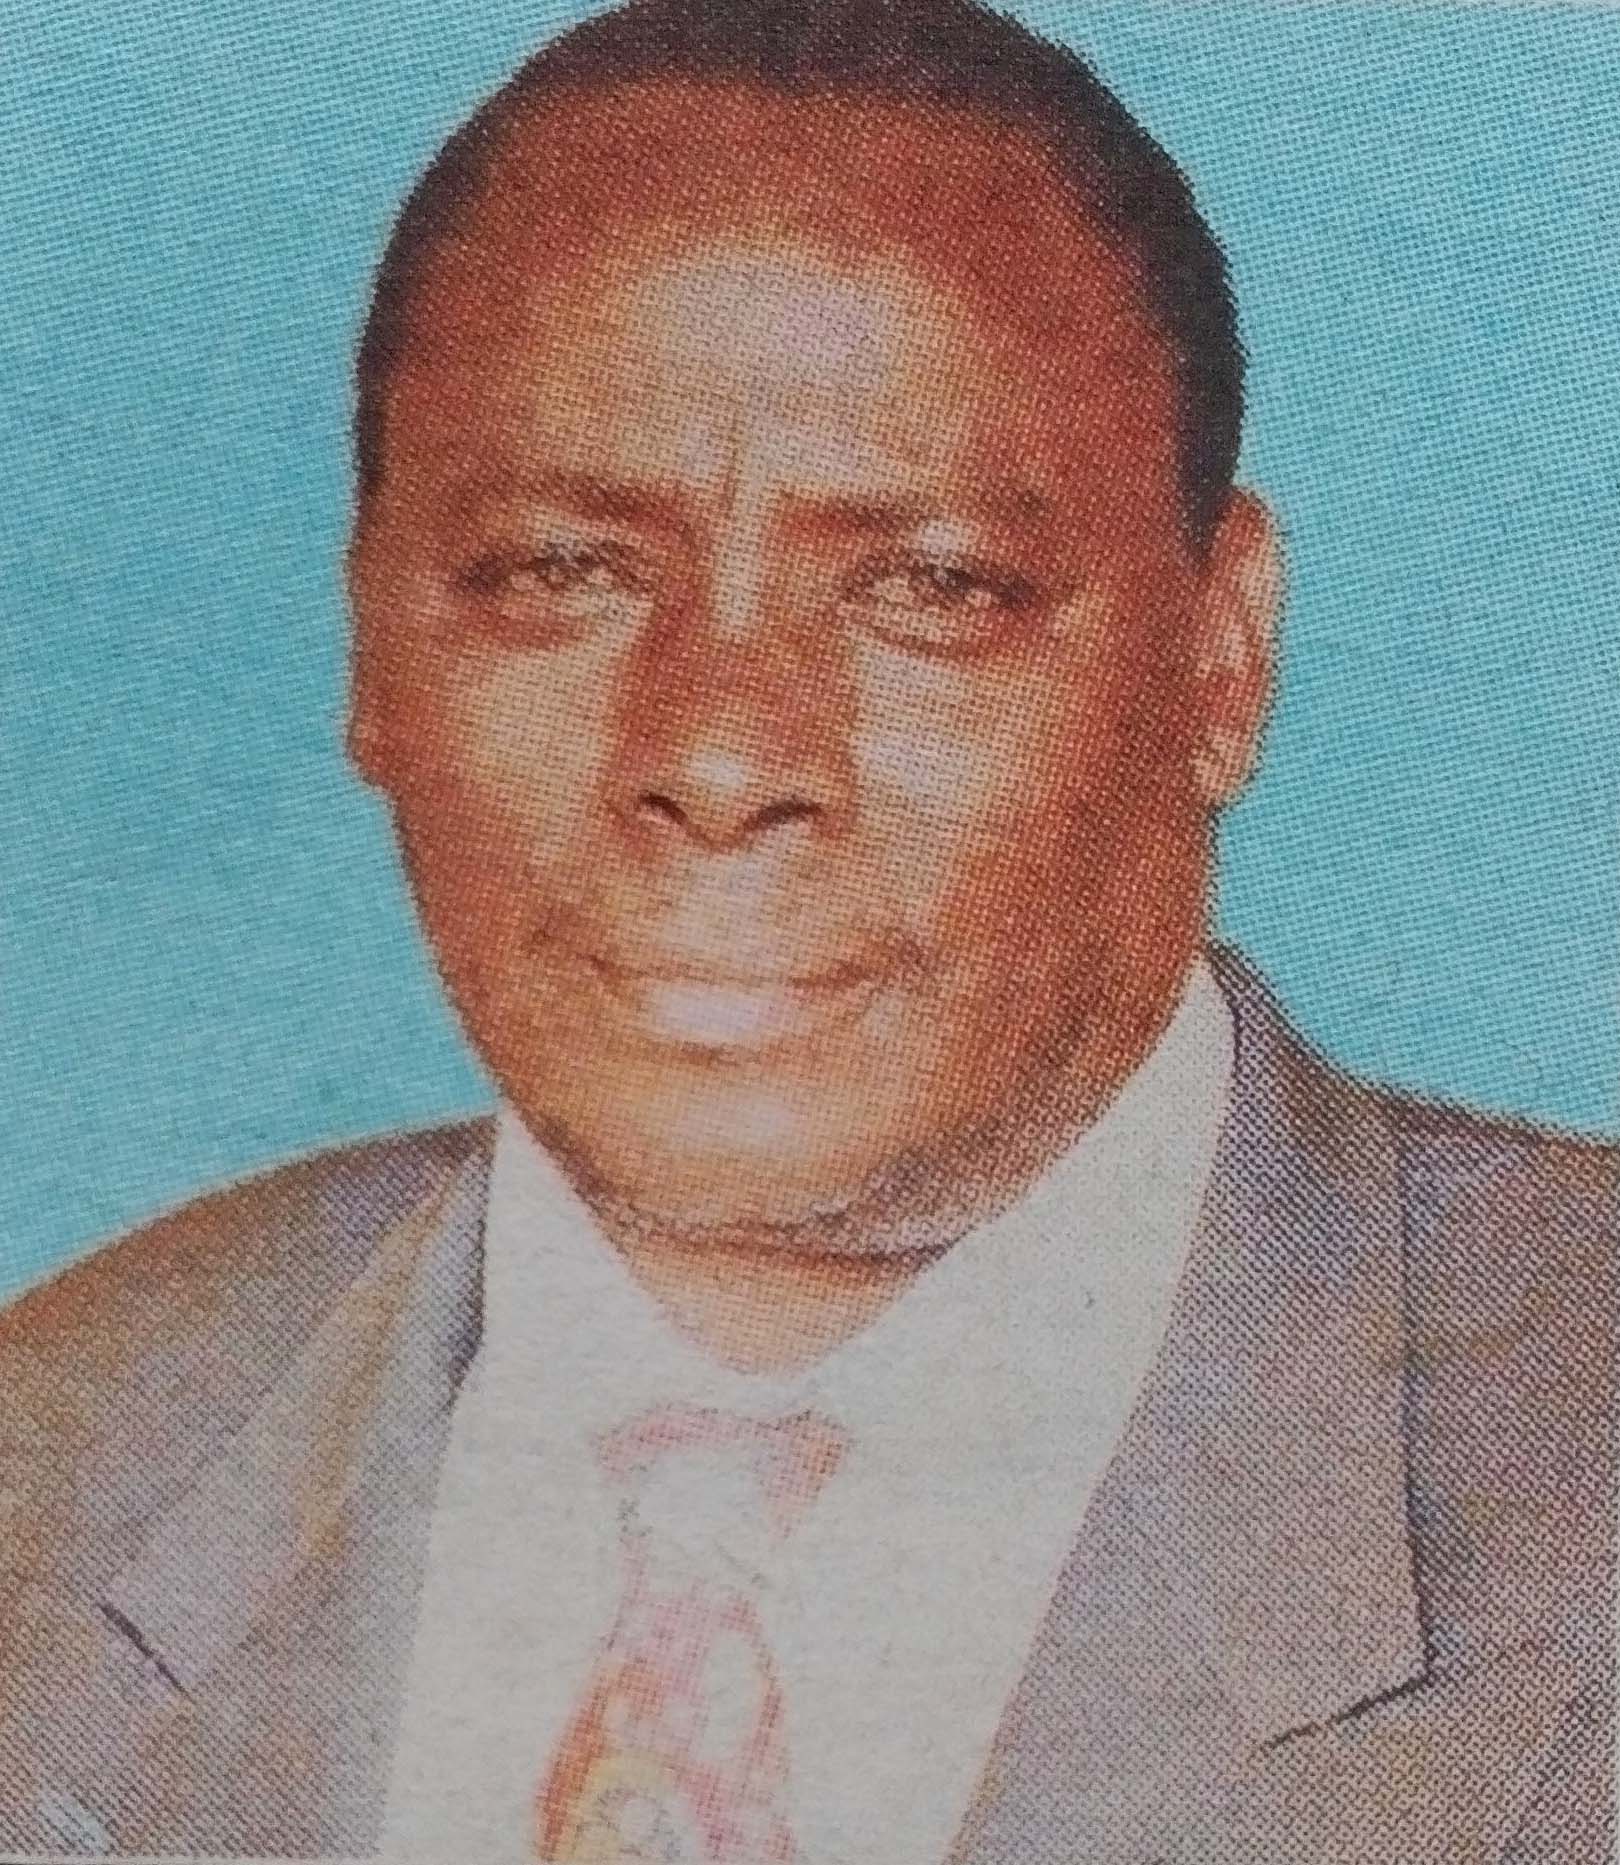 Obituary Image of Robinson Ndegwa Njoroge (Former Councilor Thaw Town)